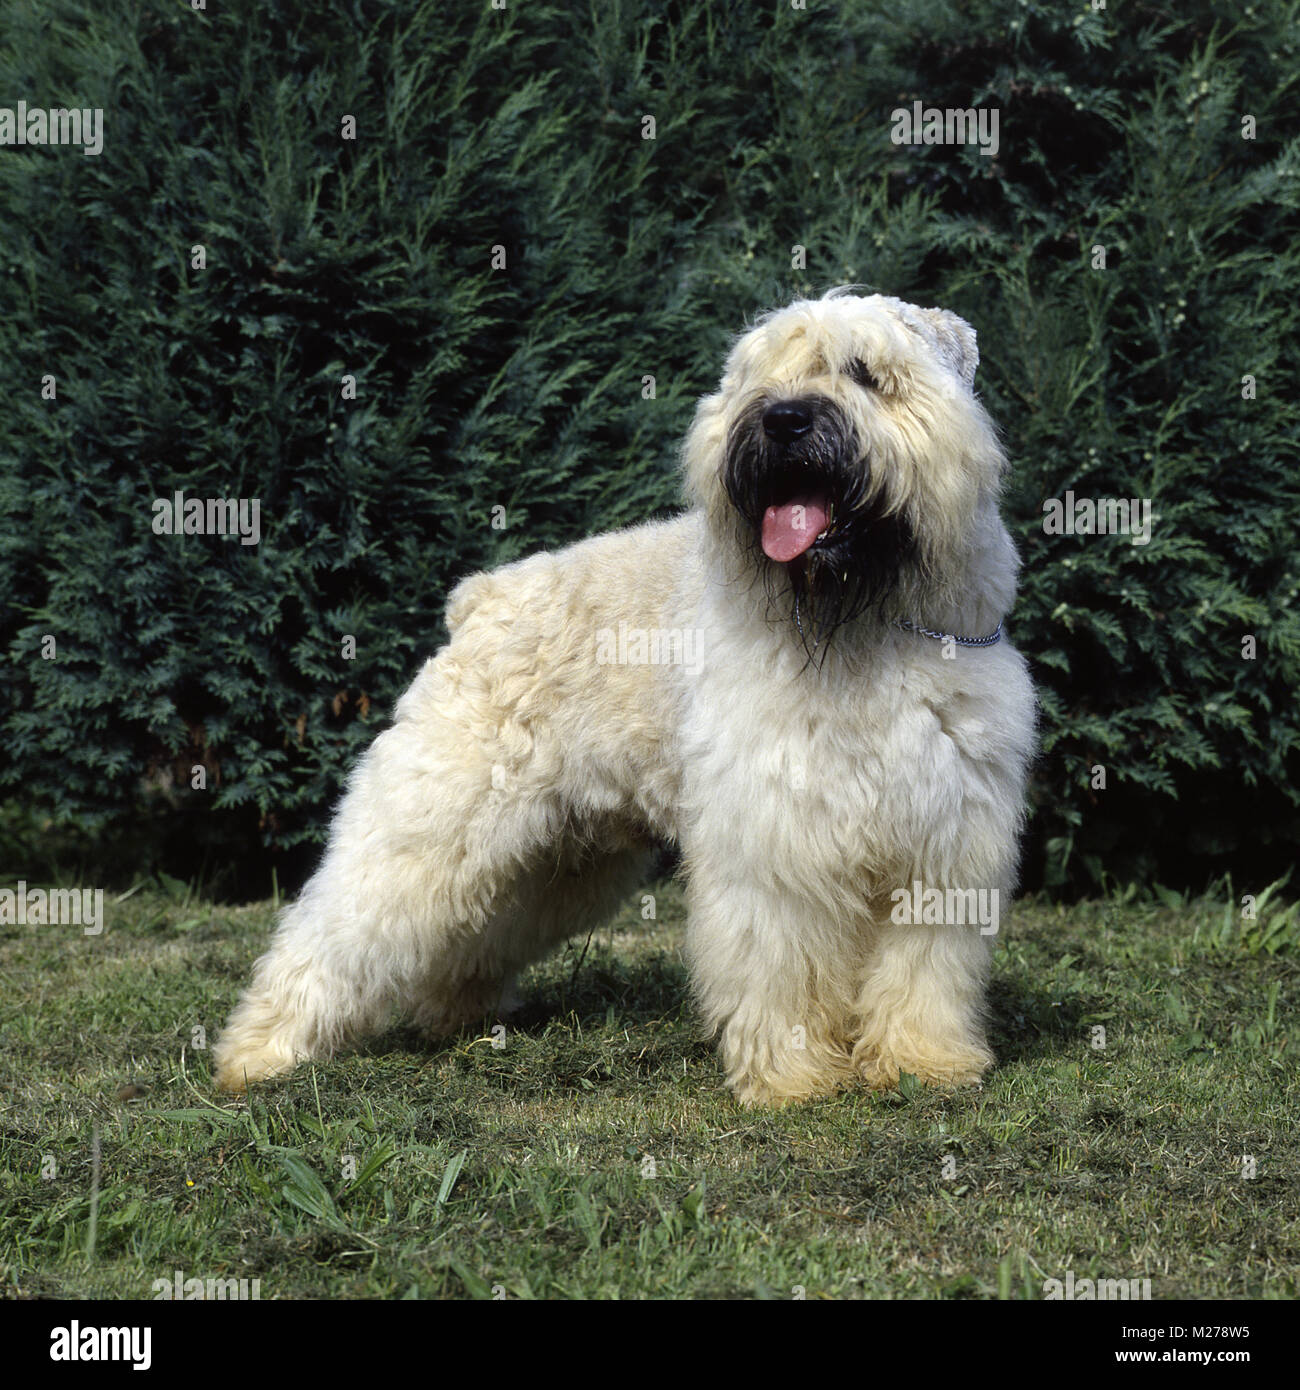 Fawn bouvier des flandres on grass Stock Photo